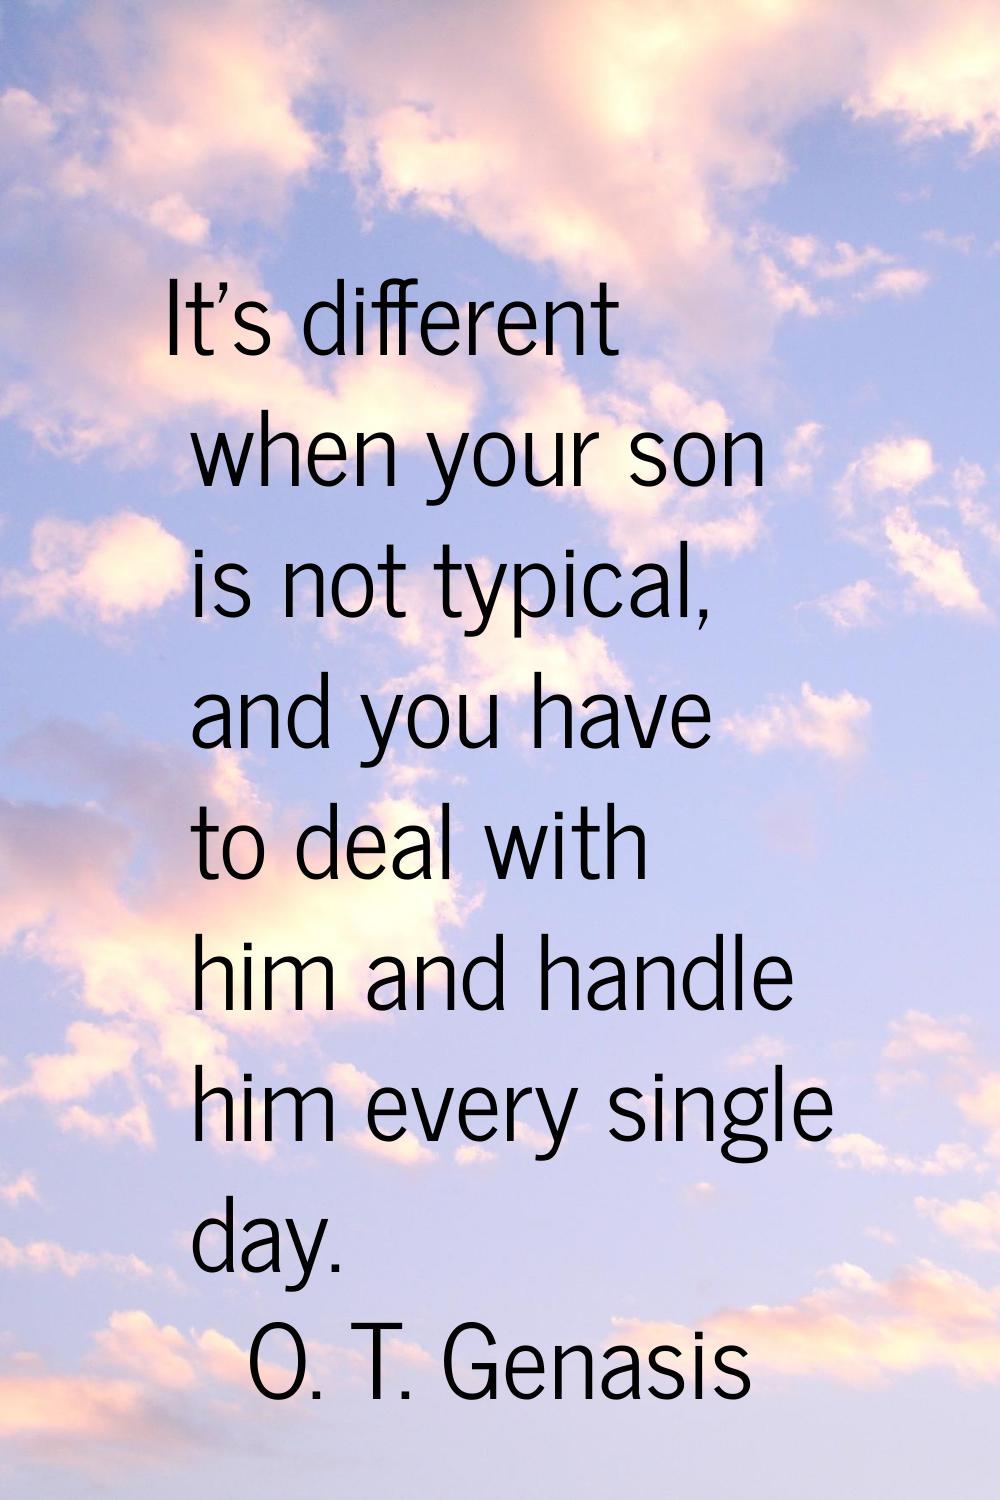 It's different when your son is not typical, and you have to deal with him and handle him every sin